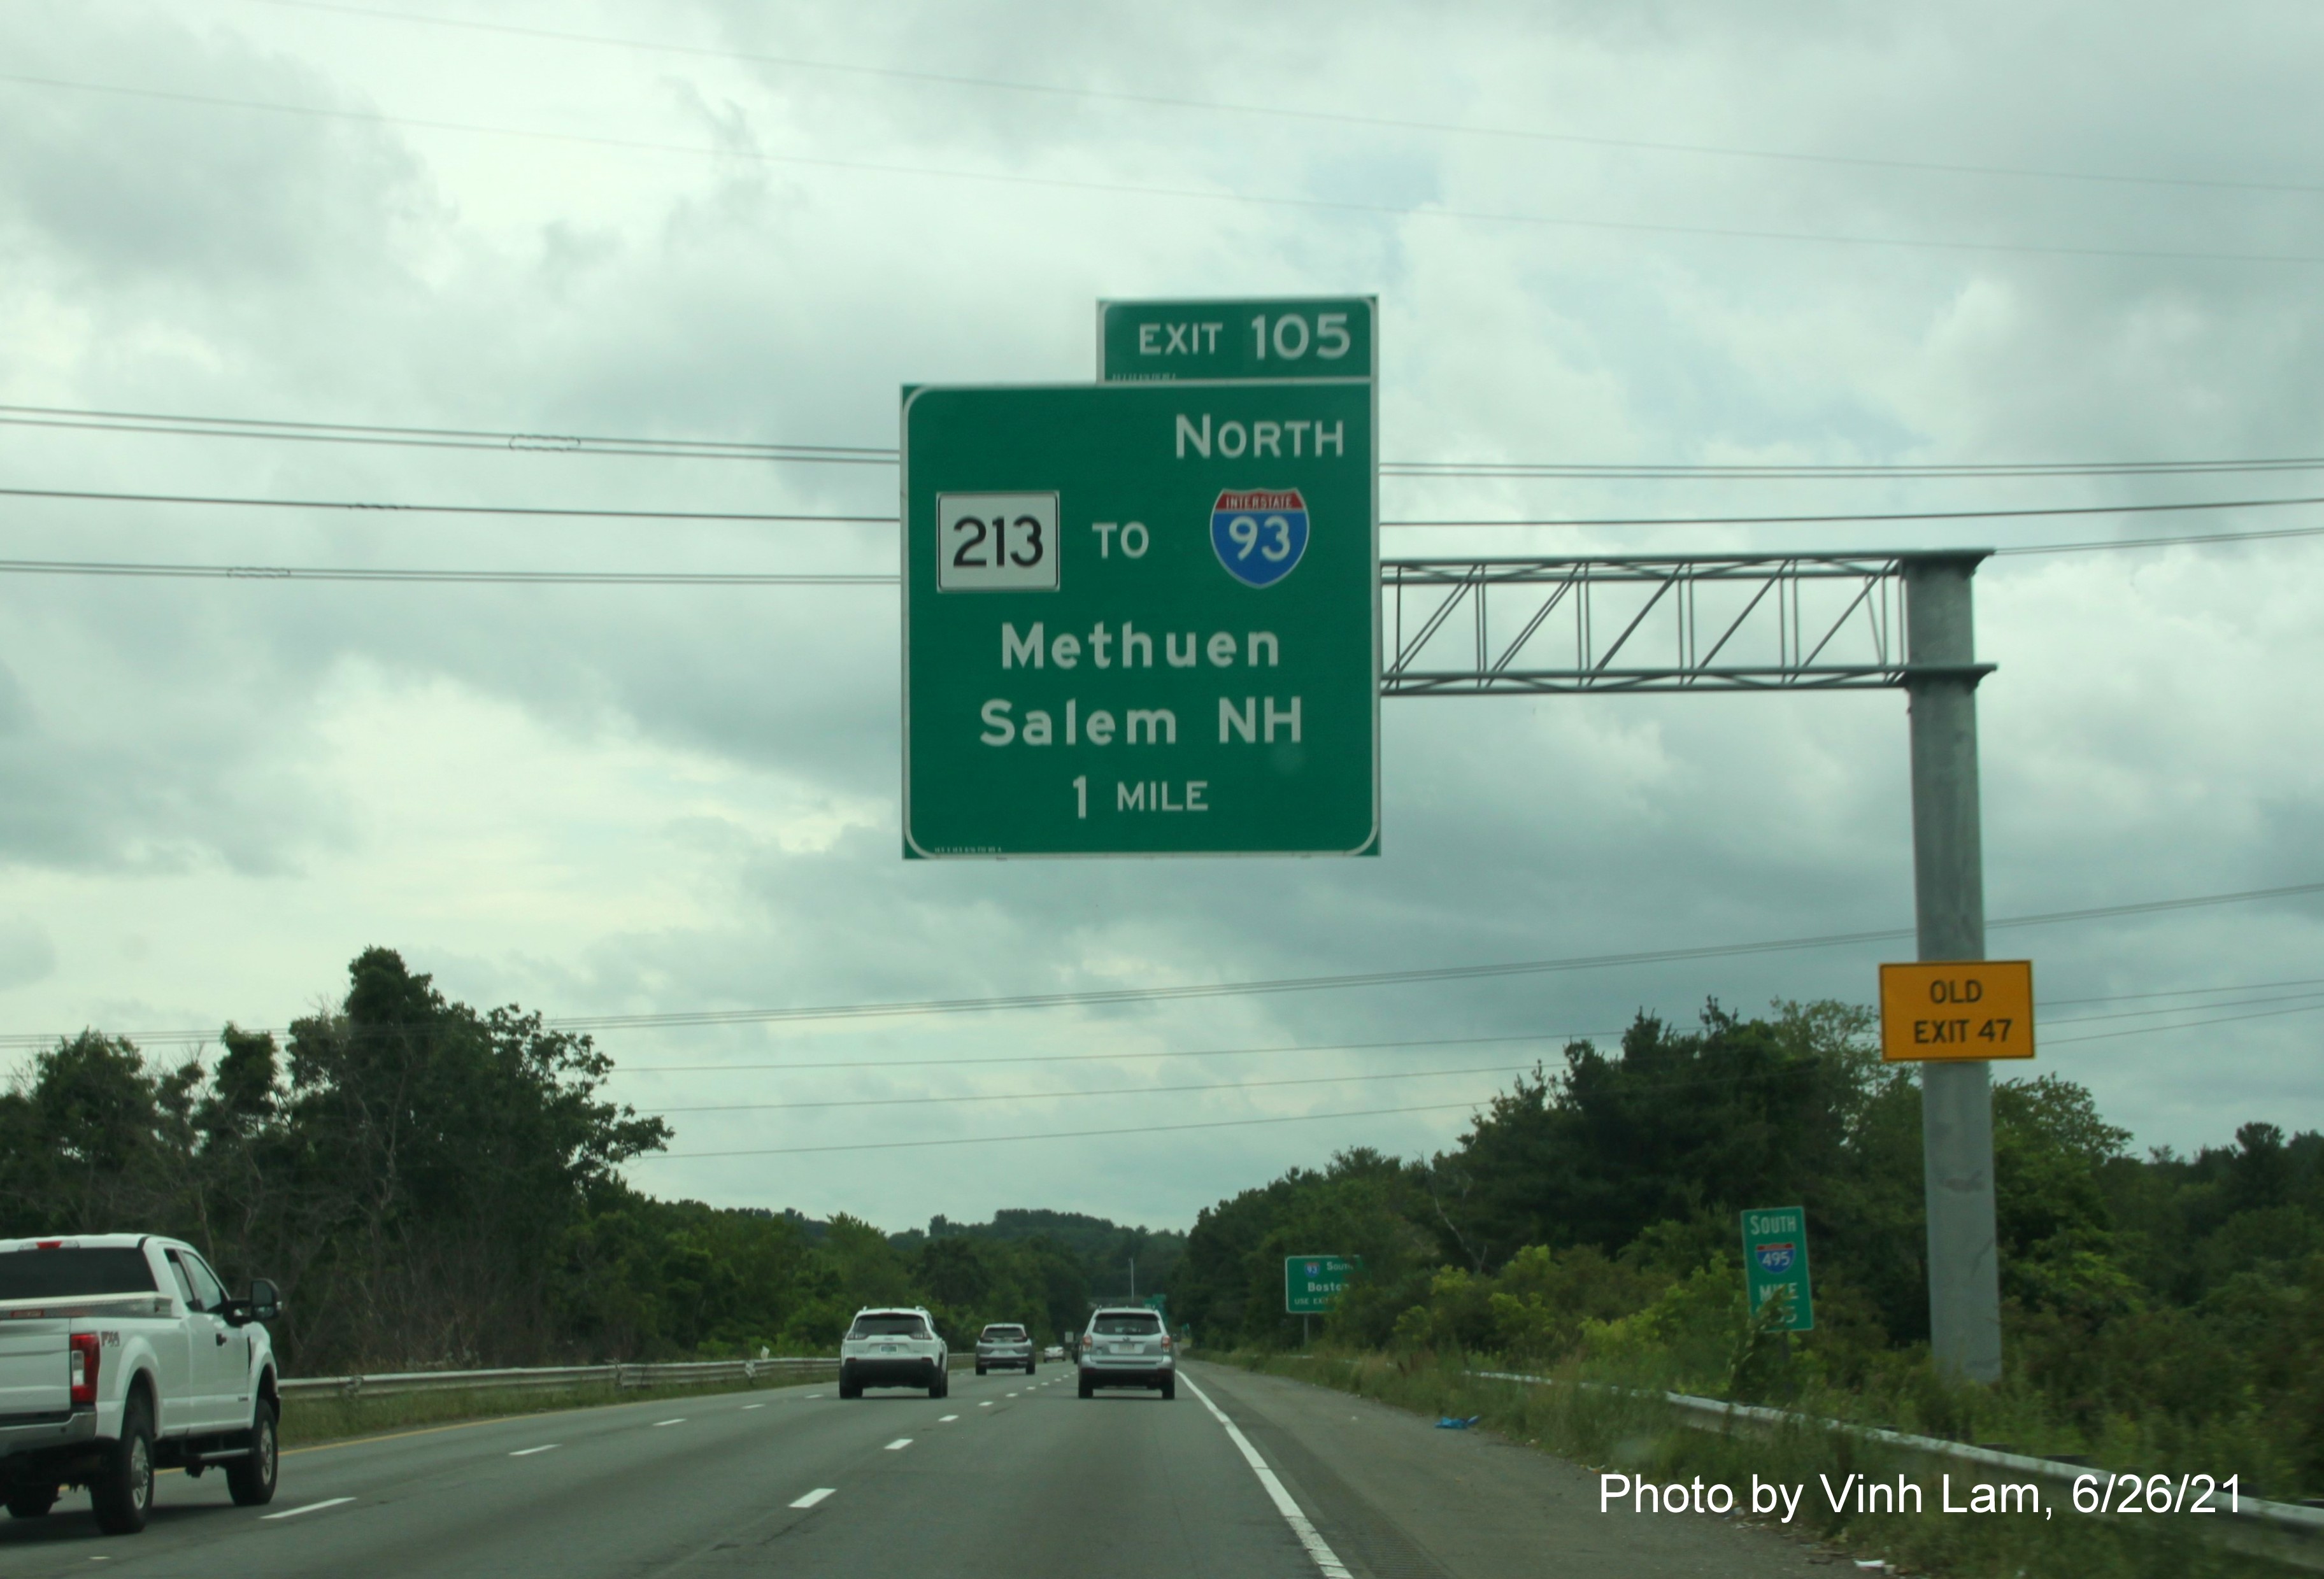 Image of 1 mile advance sign for MA 213 exit with new milepost based exit number and yellow Old Exit 47 advisory sign on support on I-495 South in Lawrence, photo by Vinh Lam, June 2021